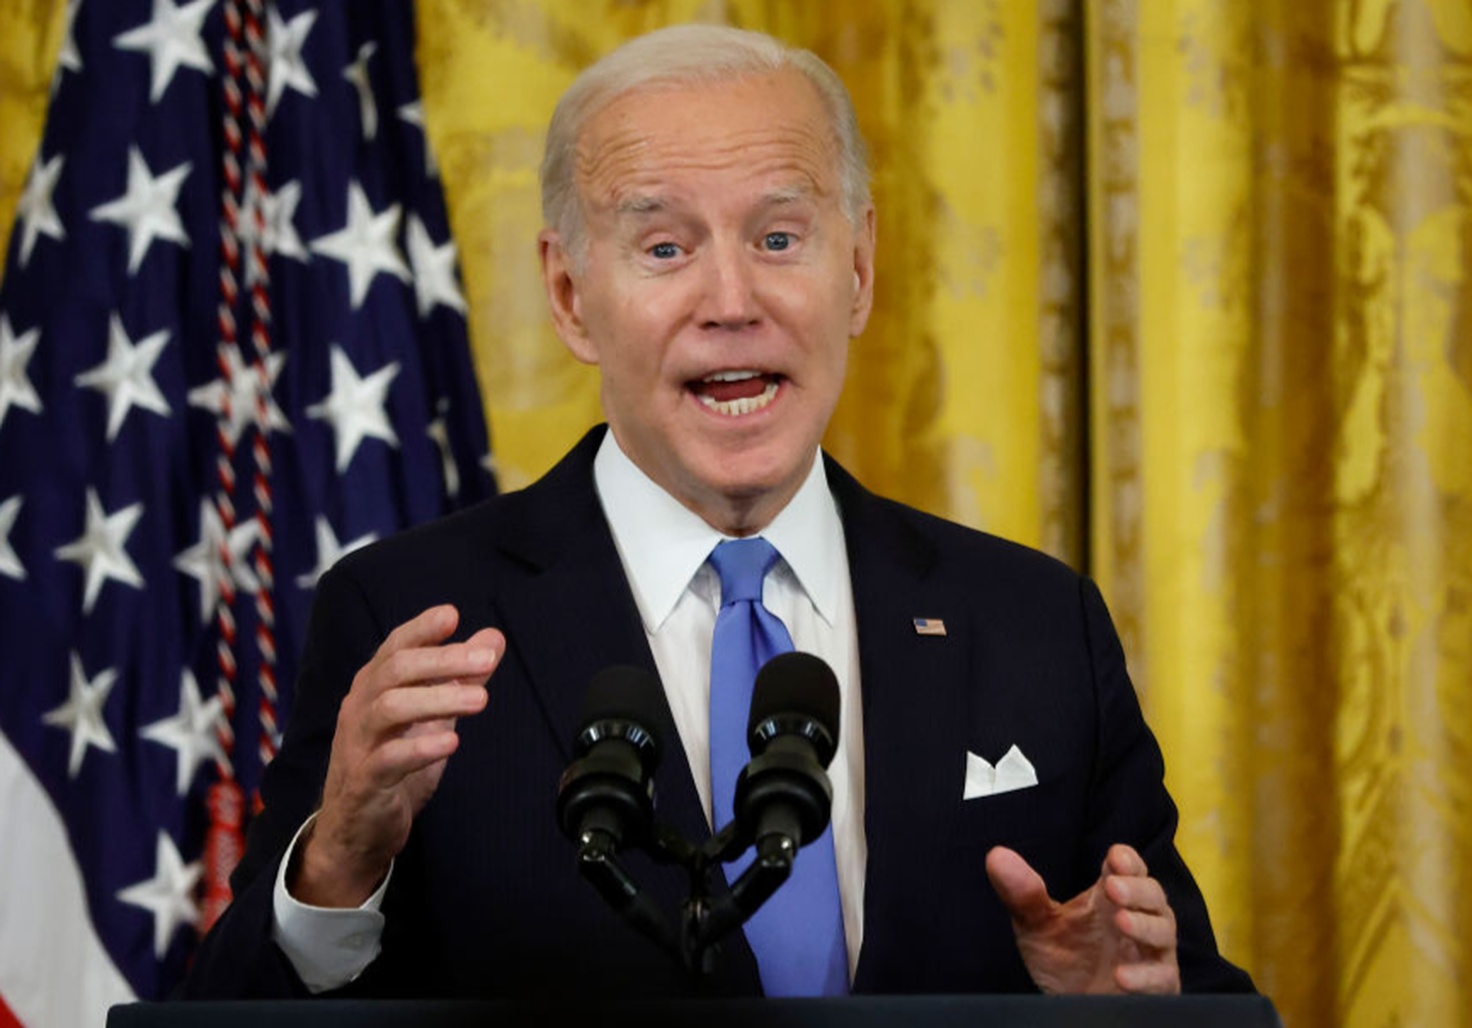 Biden Admin Sued Over ‘Flagrantly Illegal’ Student Debt Cancellation Plan